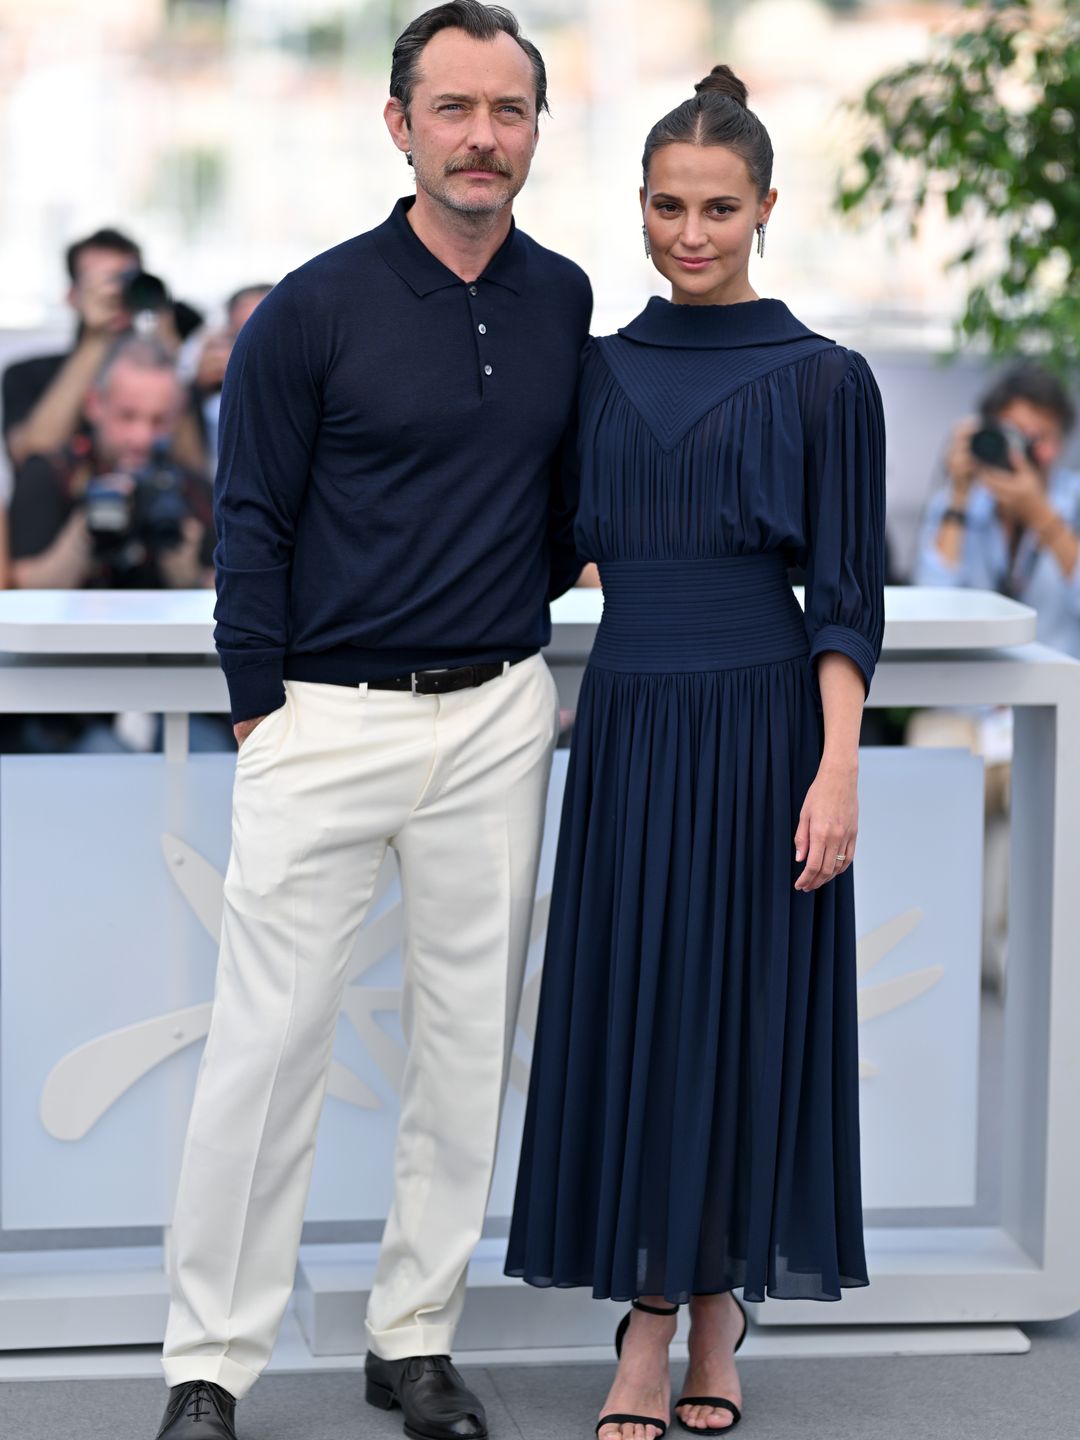 Jude Law and Alicia Vikander at the Cannes photocall for Firebrand